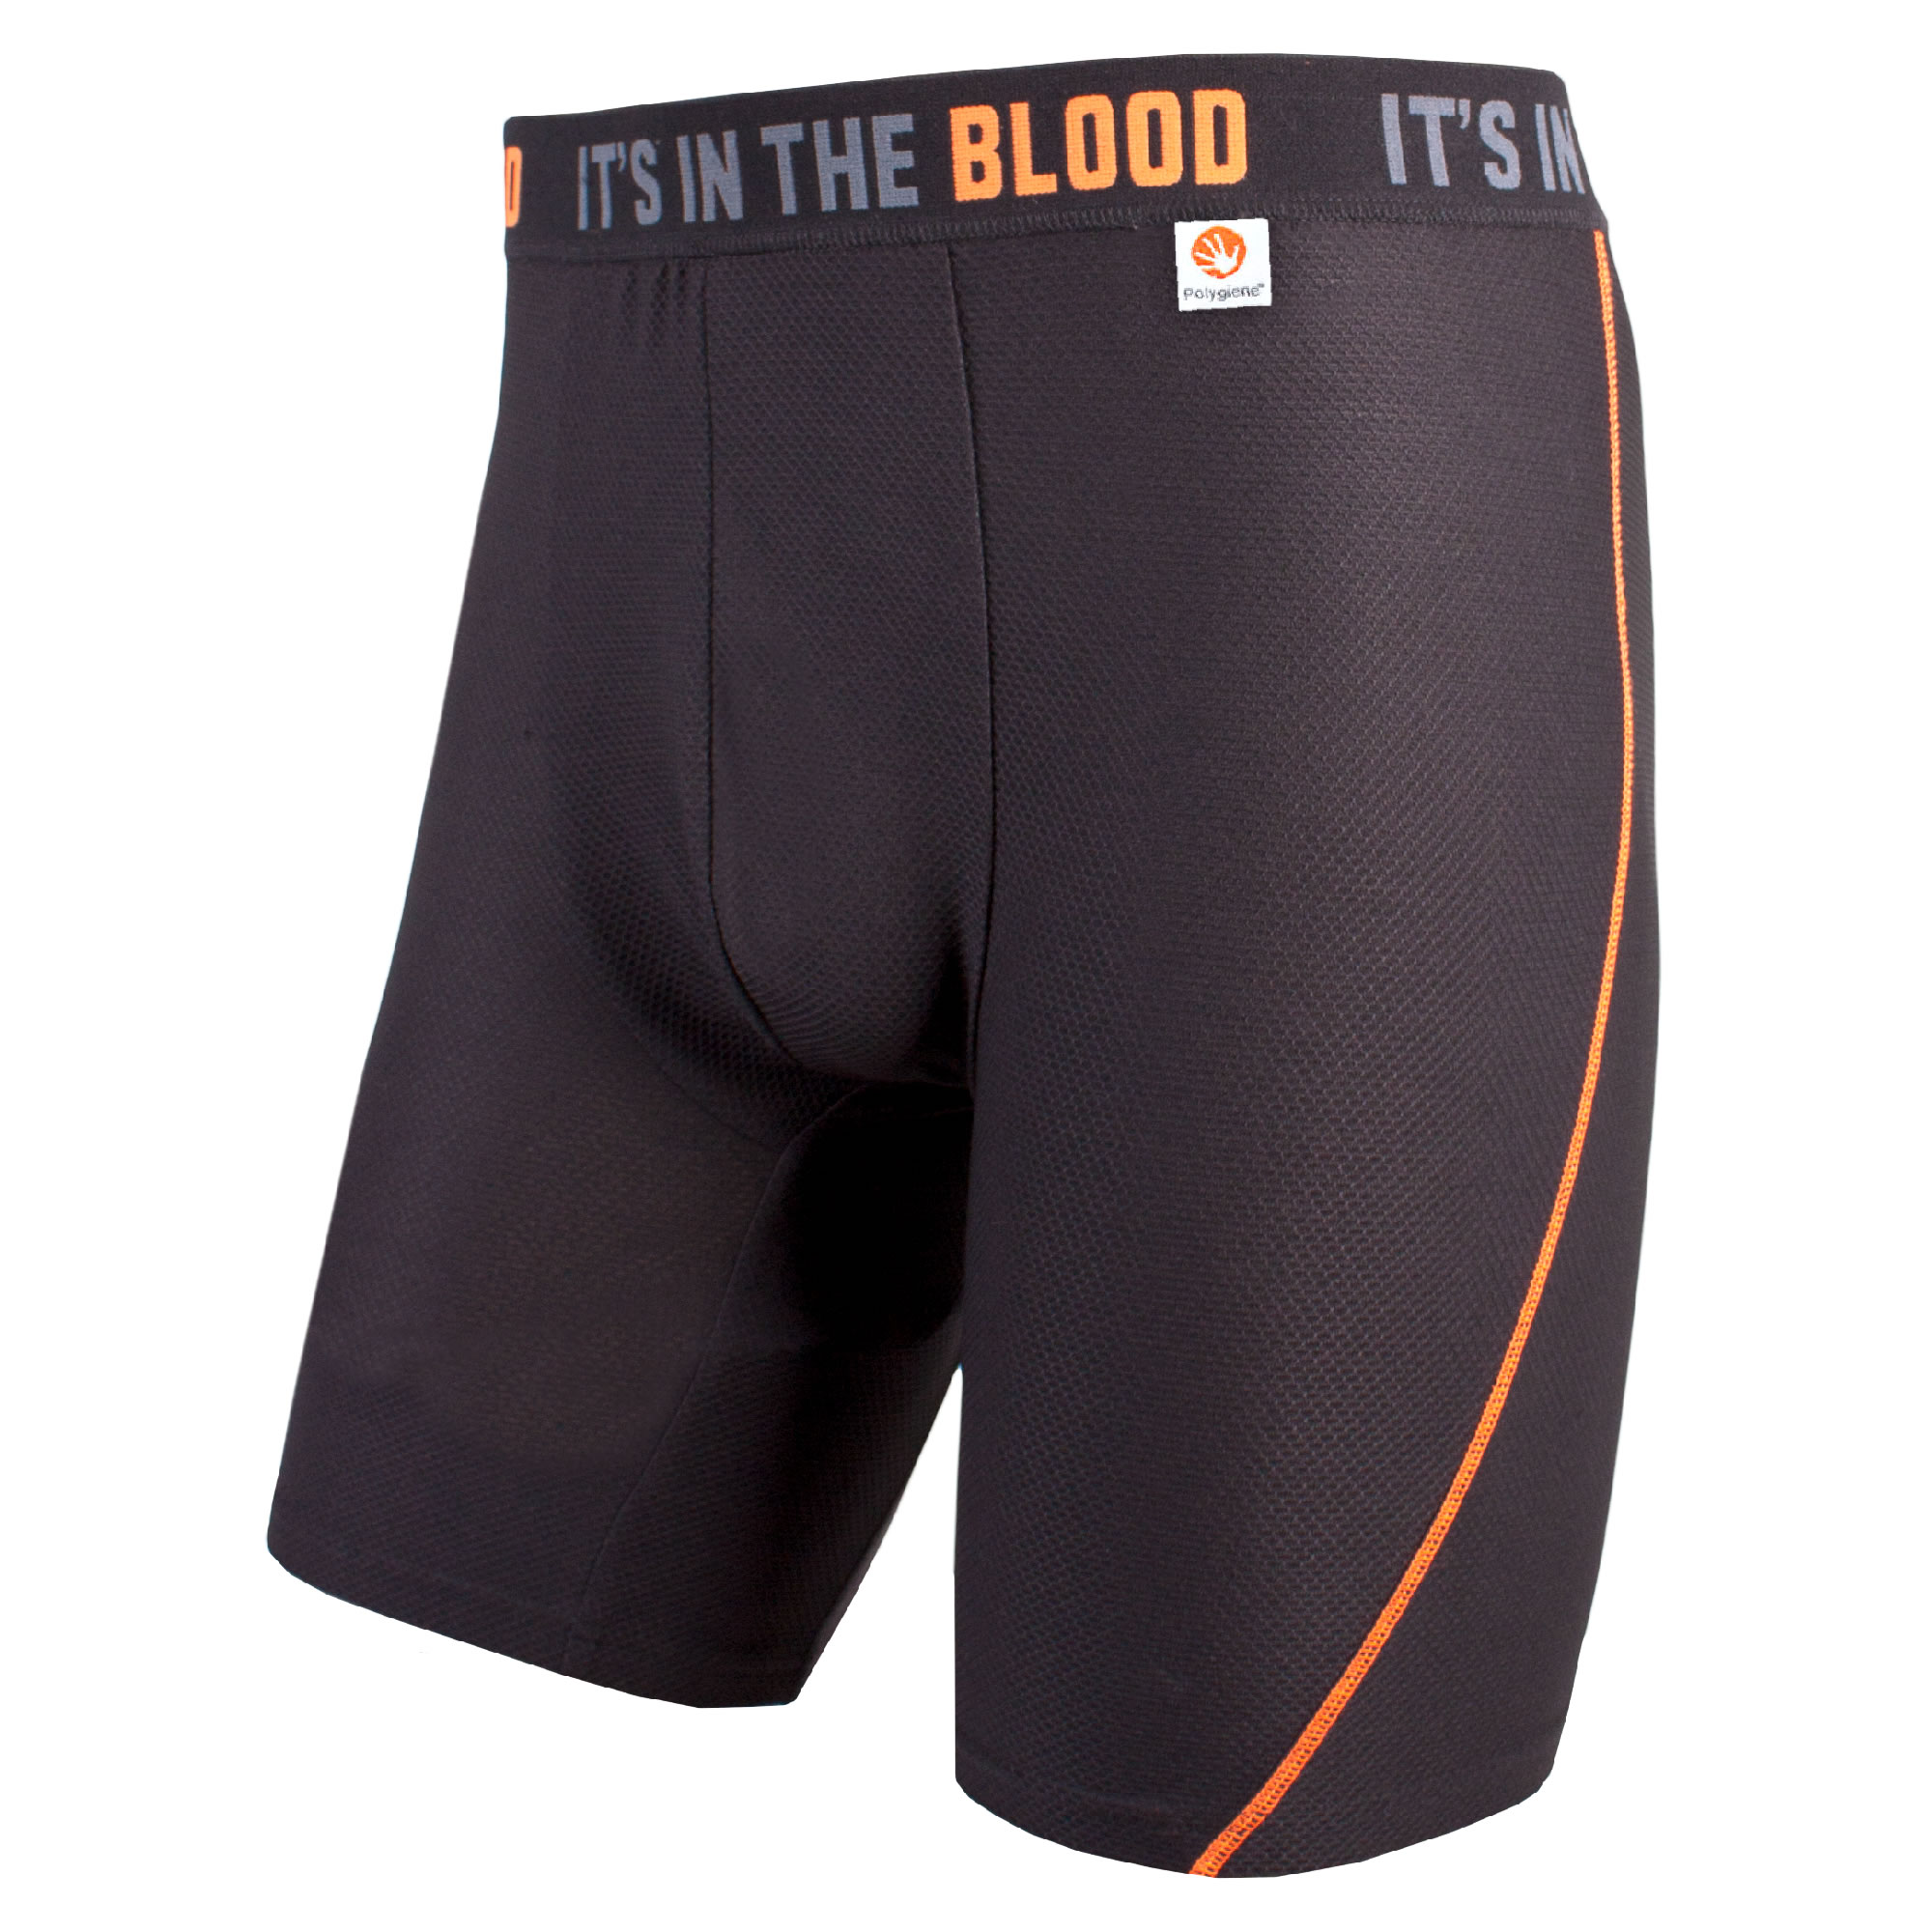 https://www.stoneycreek.co.nz/image/catalog/0_PRODUCT_PAGES/1_HUNTING/1_Mens/4_Base_Layer/LBM-7405-MBK%20Base%20Dry%20Boxers%20-%20Bayleaf/LBM-7405-MBK_Base_Dry_Boxers_Black_Front_2000px.jpg